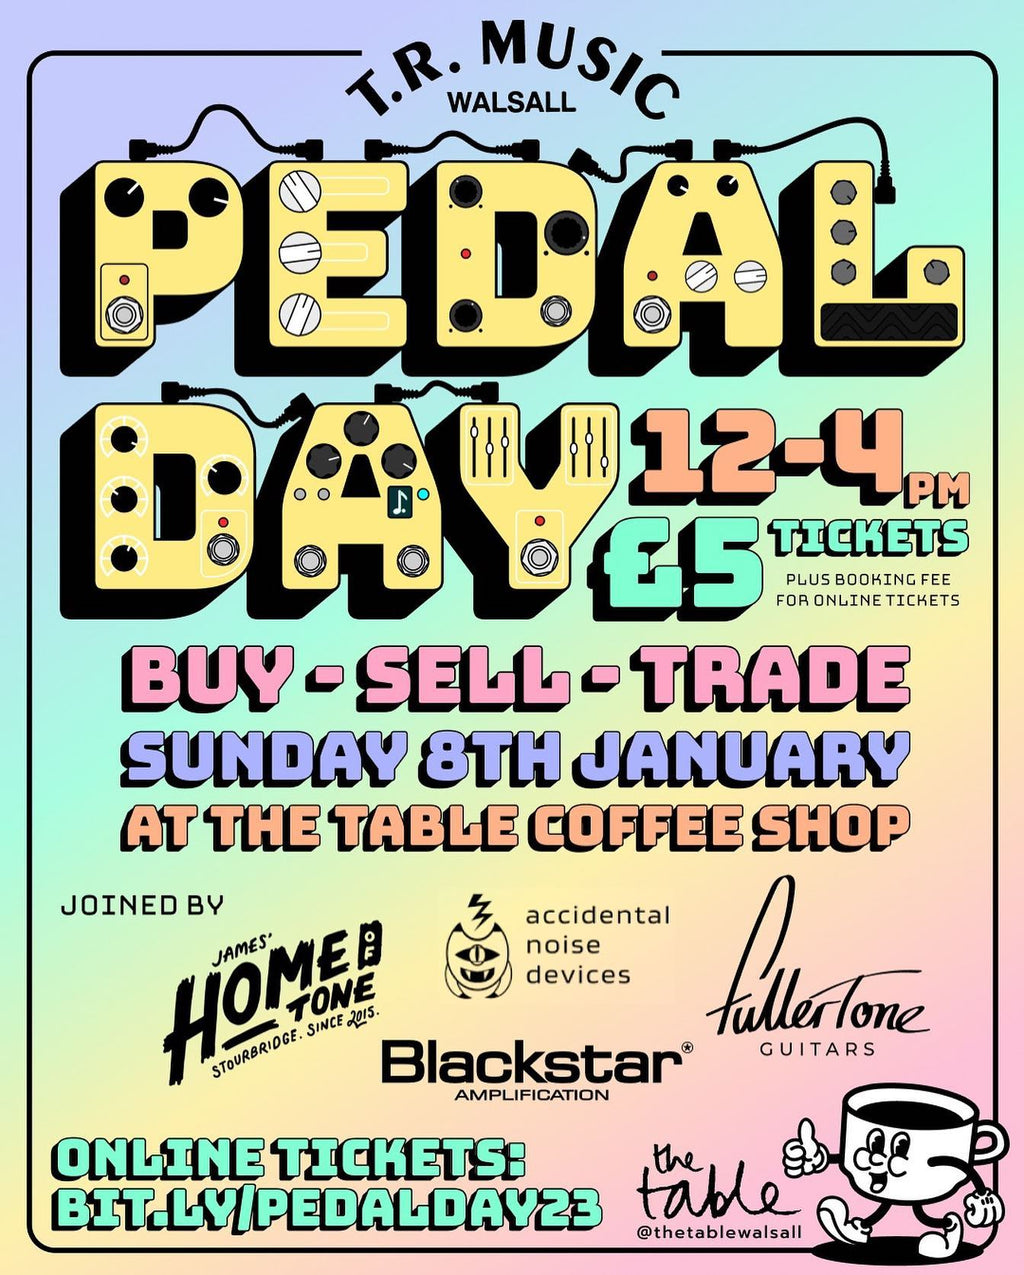 T.R.Music Walsall presents 'PEDAL DAY'! 8th January 2023 12-4pm